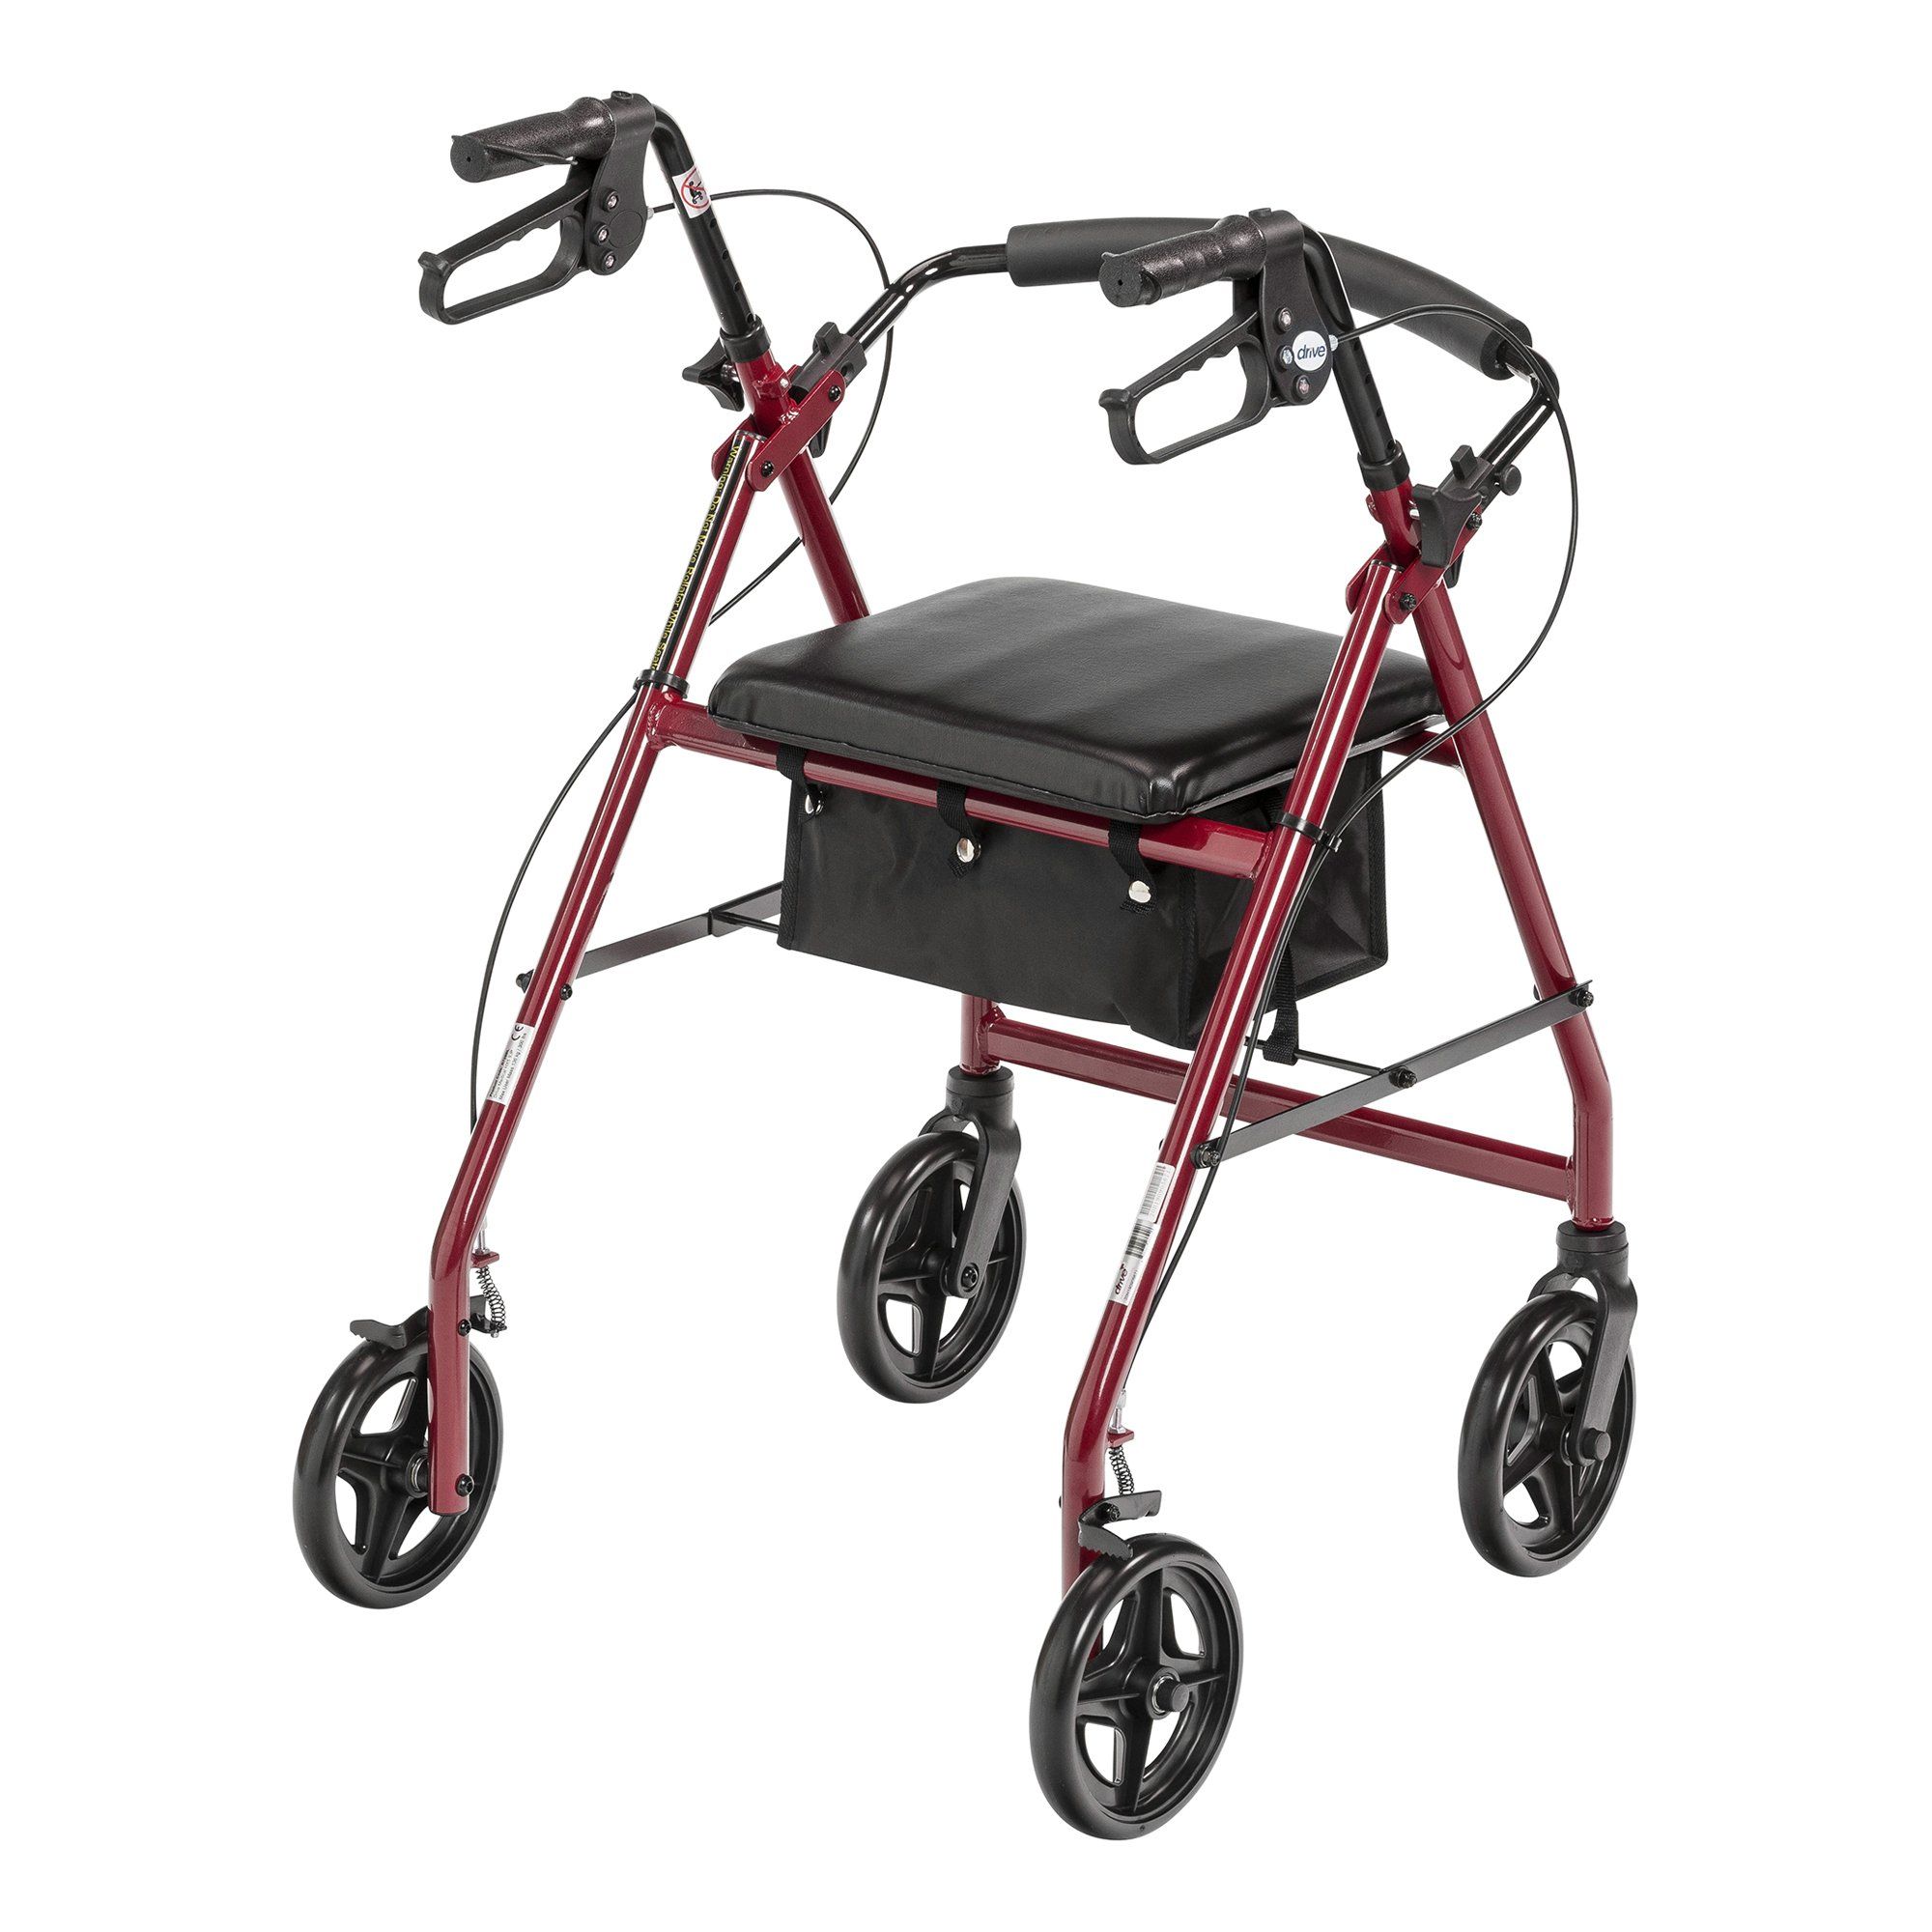 McKesson Rollator Walker with Seat, Red - 300 lbs Capacity